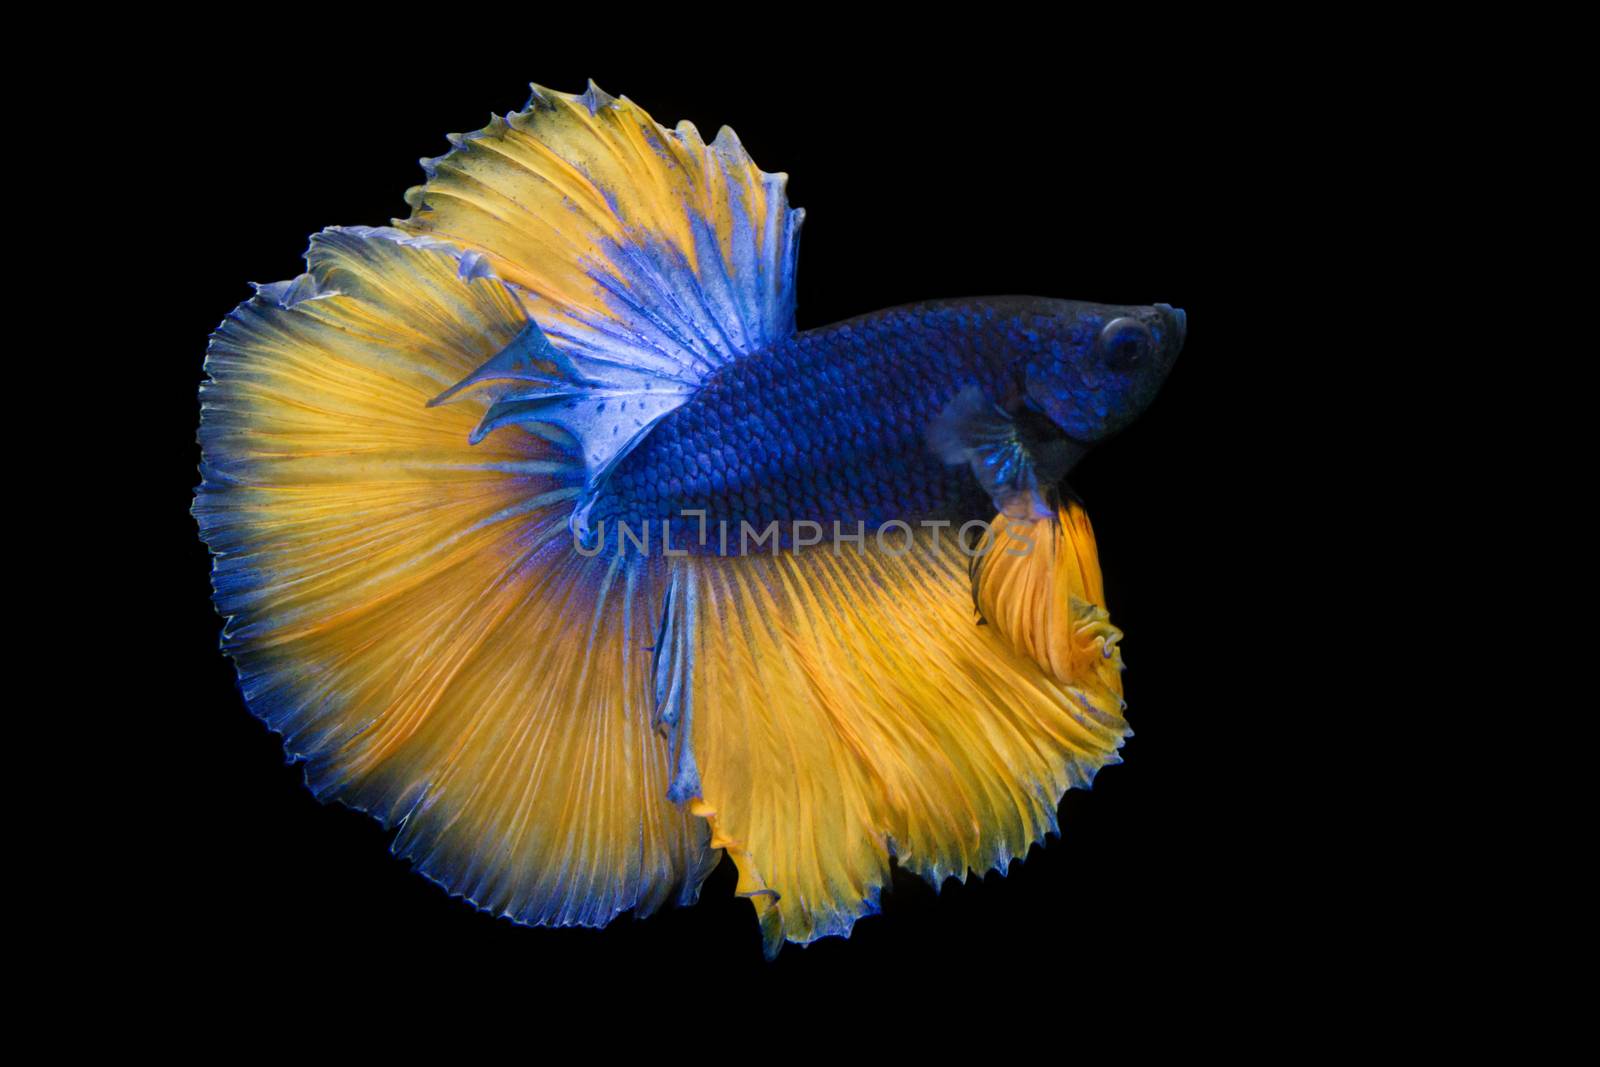 Image Of Betta Fish Isolated On Black Background, Action Moving Moment Of Mustard Over Half Moon Betta, Siamese Fighting Fish